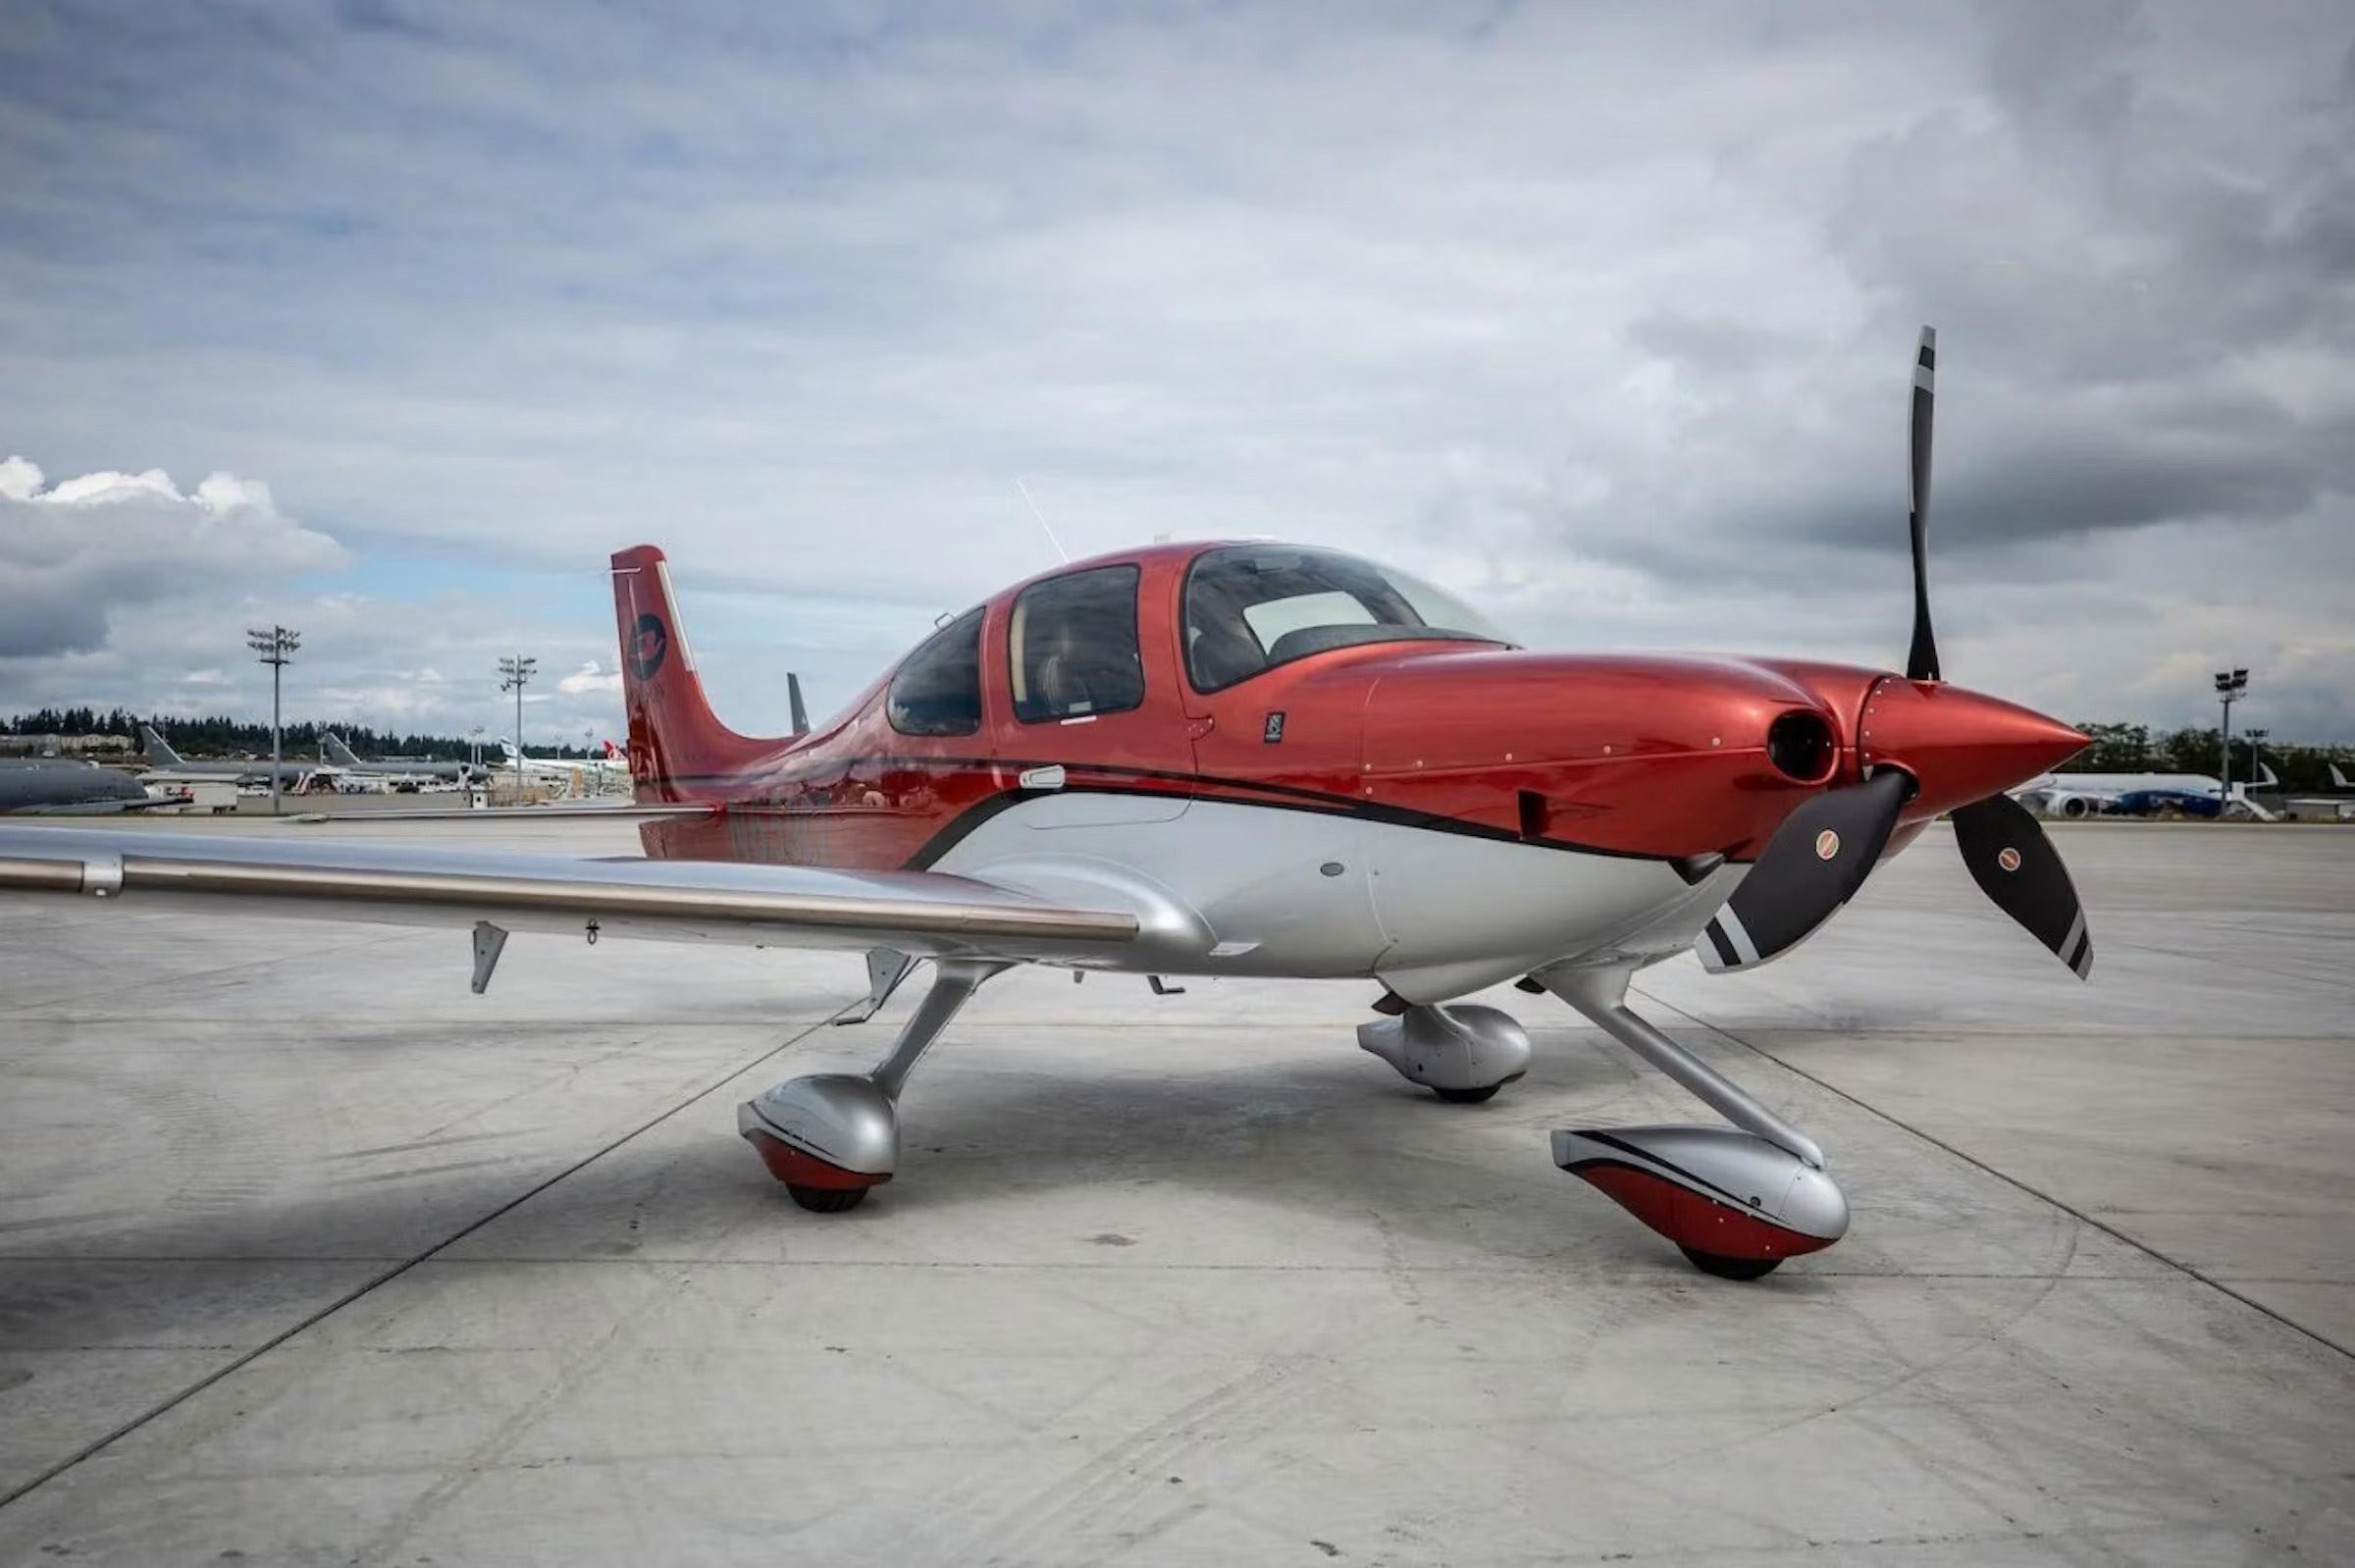 This 2017 Cirrus SR22T Is a High-Performance, Parachute-Protected ‘AircraftForSale’ Top Pick